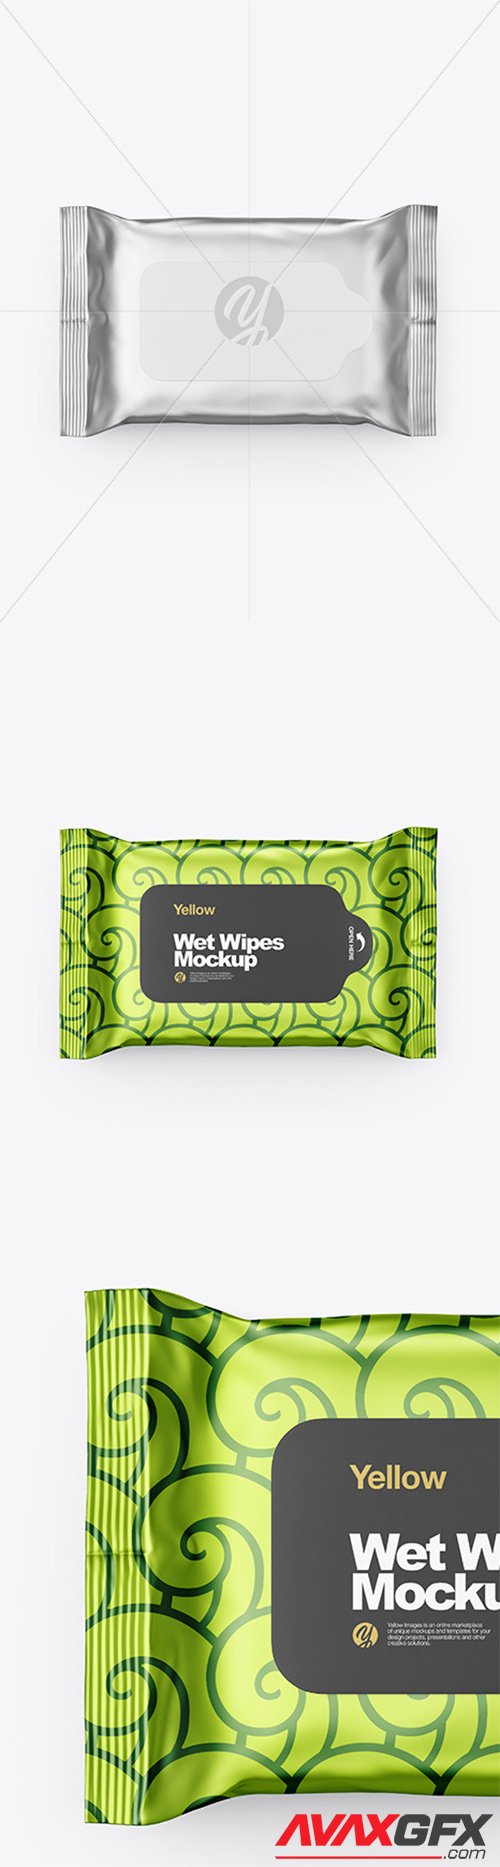 Download Metallic Wet Wipes Pack Mockup Top View 61616 Avaxgfx All Downloads That You Need In One Place Graphic From Nitroflare Rapidgator